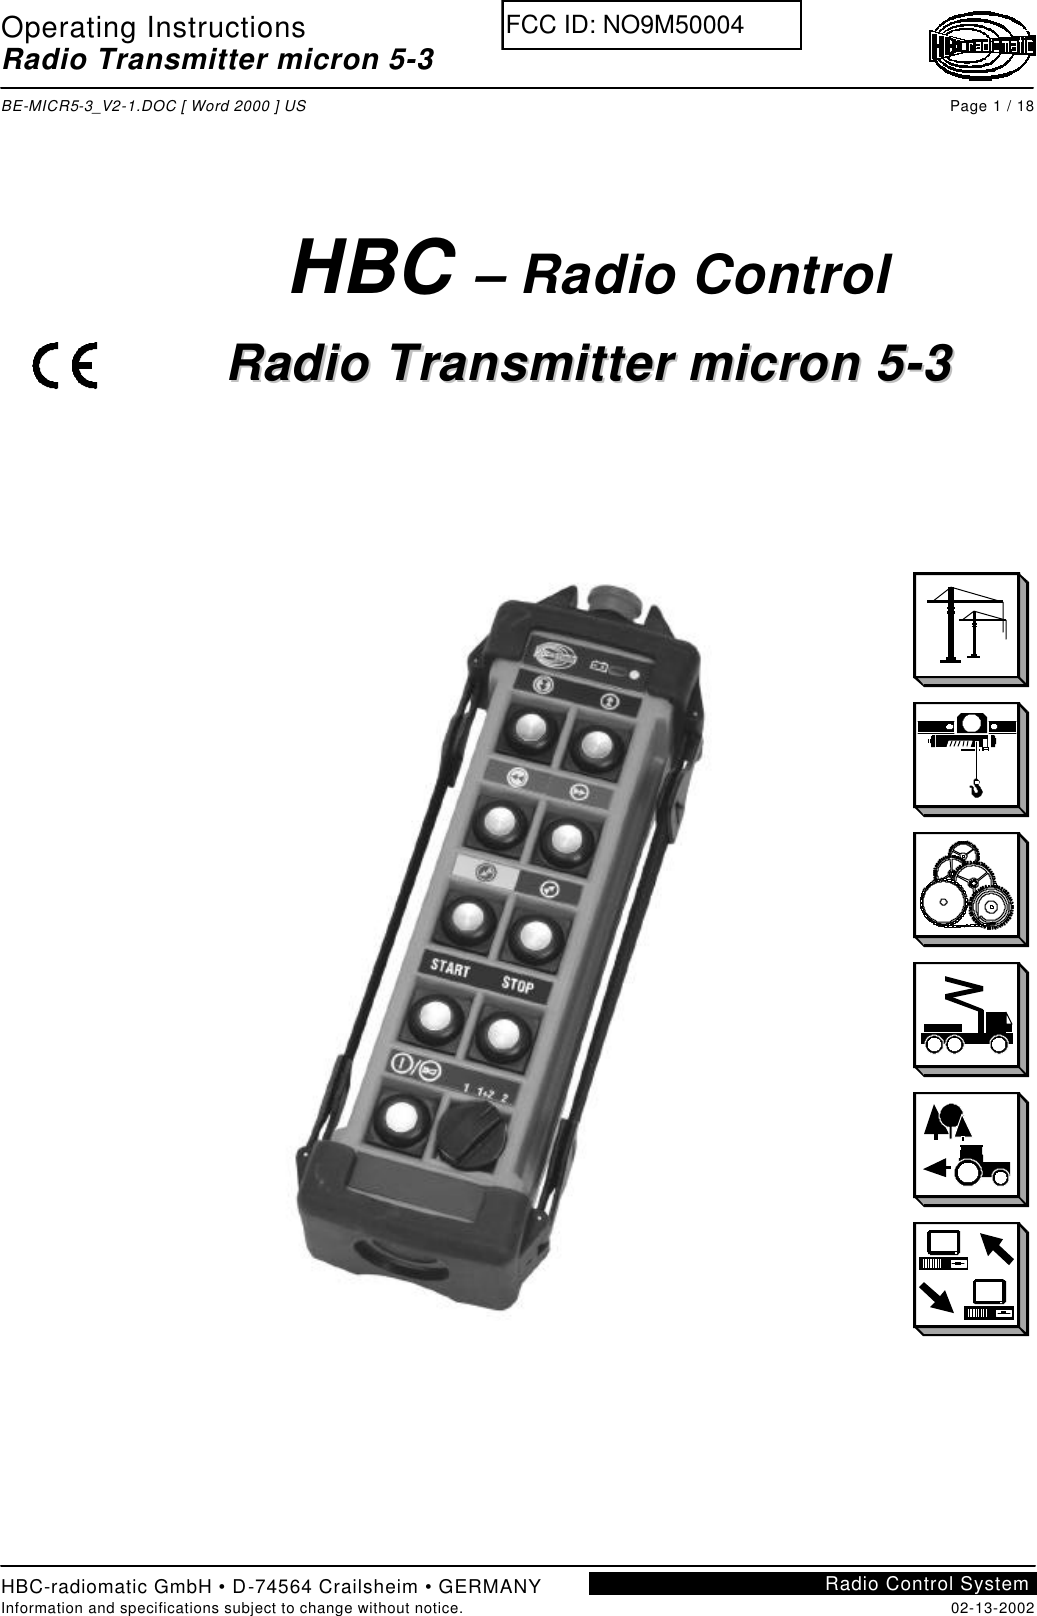 Operating Instructions Radio Transmitter micron 5-3  BE-MICR5-3_V2-1.DOC [ Word 2000 ] US Page 1 / 18 HBC-radiomatic GmbH • D-74564 Crailsheim • GERMANY Information and specifications subject to change without notice. 02-13-2002 Radio Control System        HBC – Radio Control  RRaaddiioo  TTrraannssmmiitttteerr  mmiiccrroonn  55--33       FCC ID: NO9M50004